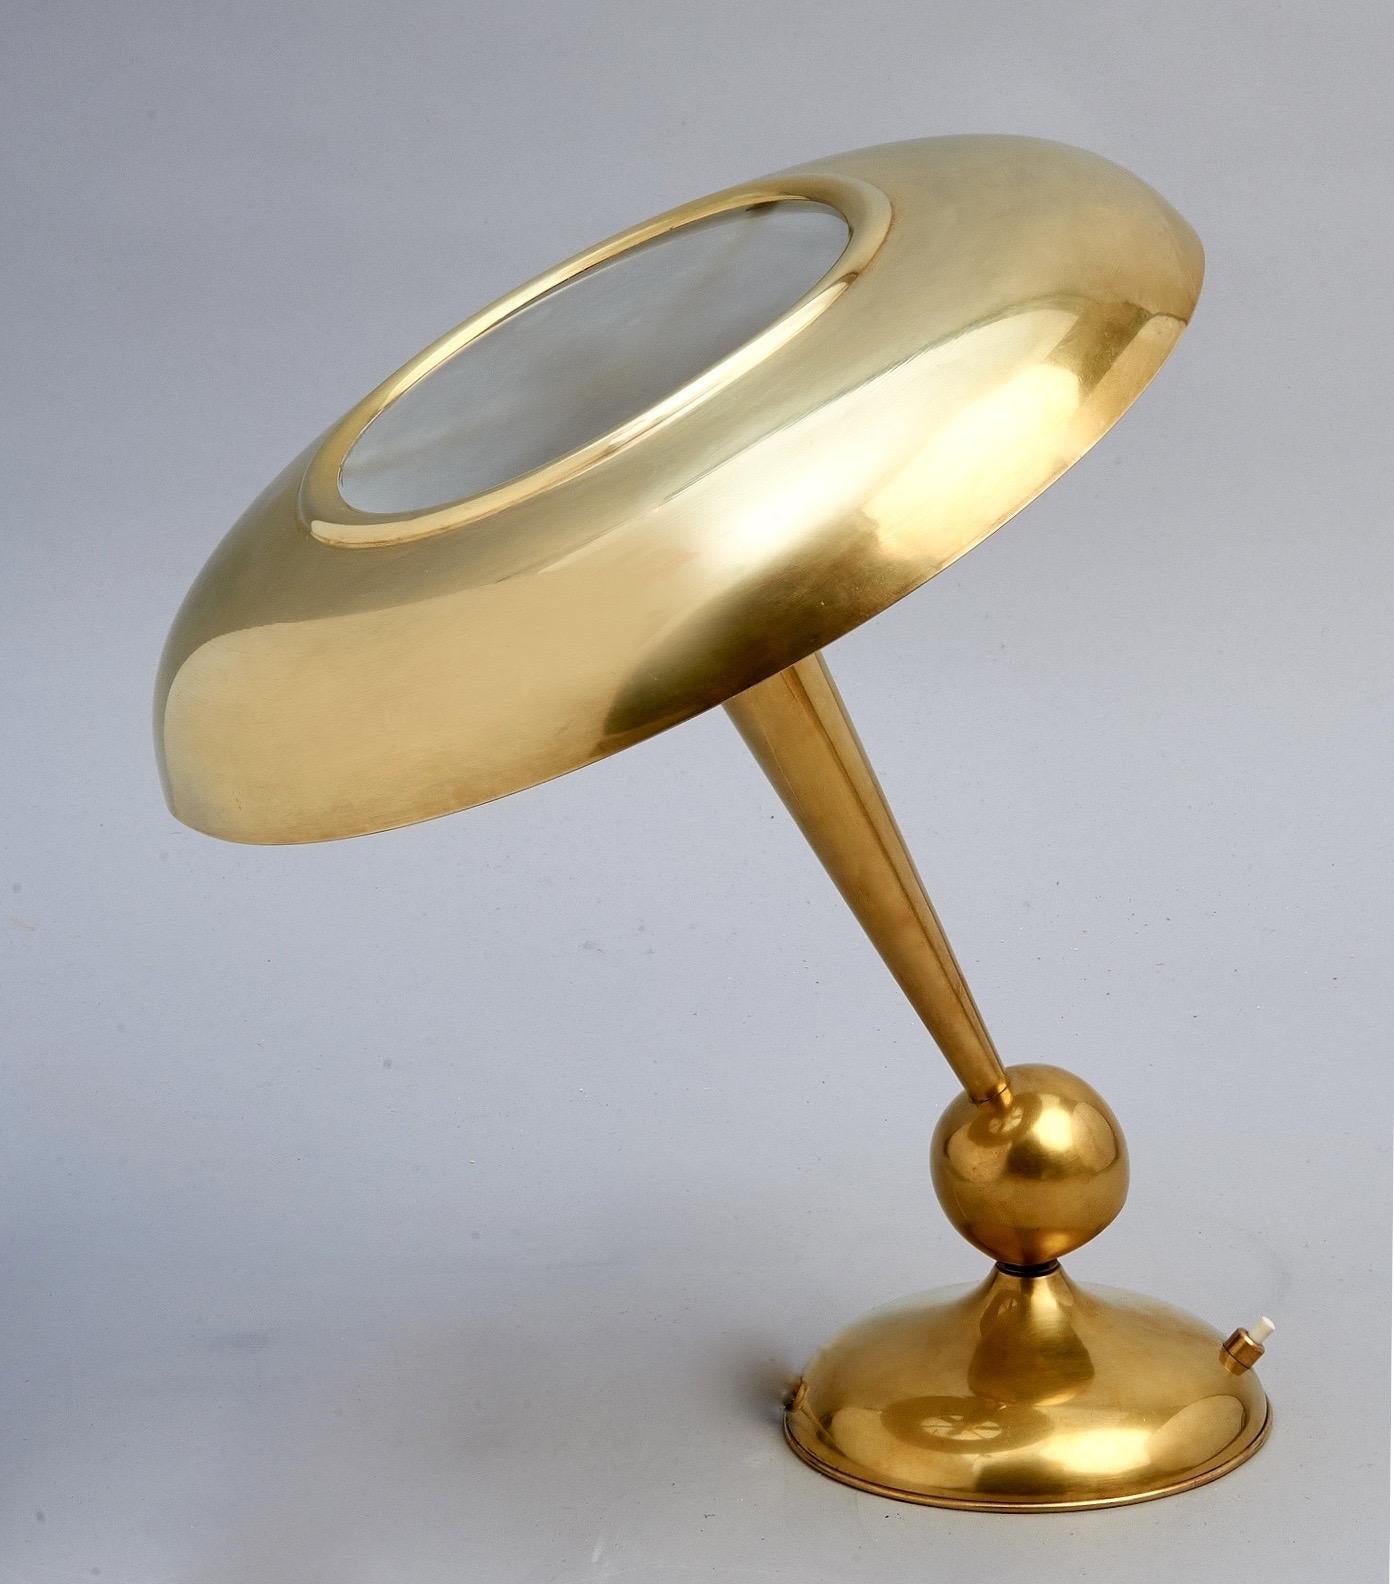 Oscar Torlasco (1934 - 2004)

An iconic modernist articulated desk lamp by Oscar Torlasco for Lumi, in polished brass. With an adjustable conical arm, a swivel ball joint at the base allowing for full range of motion, and a spherical shade topped by